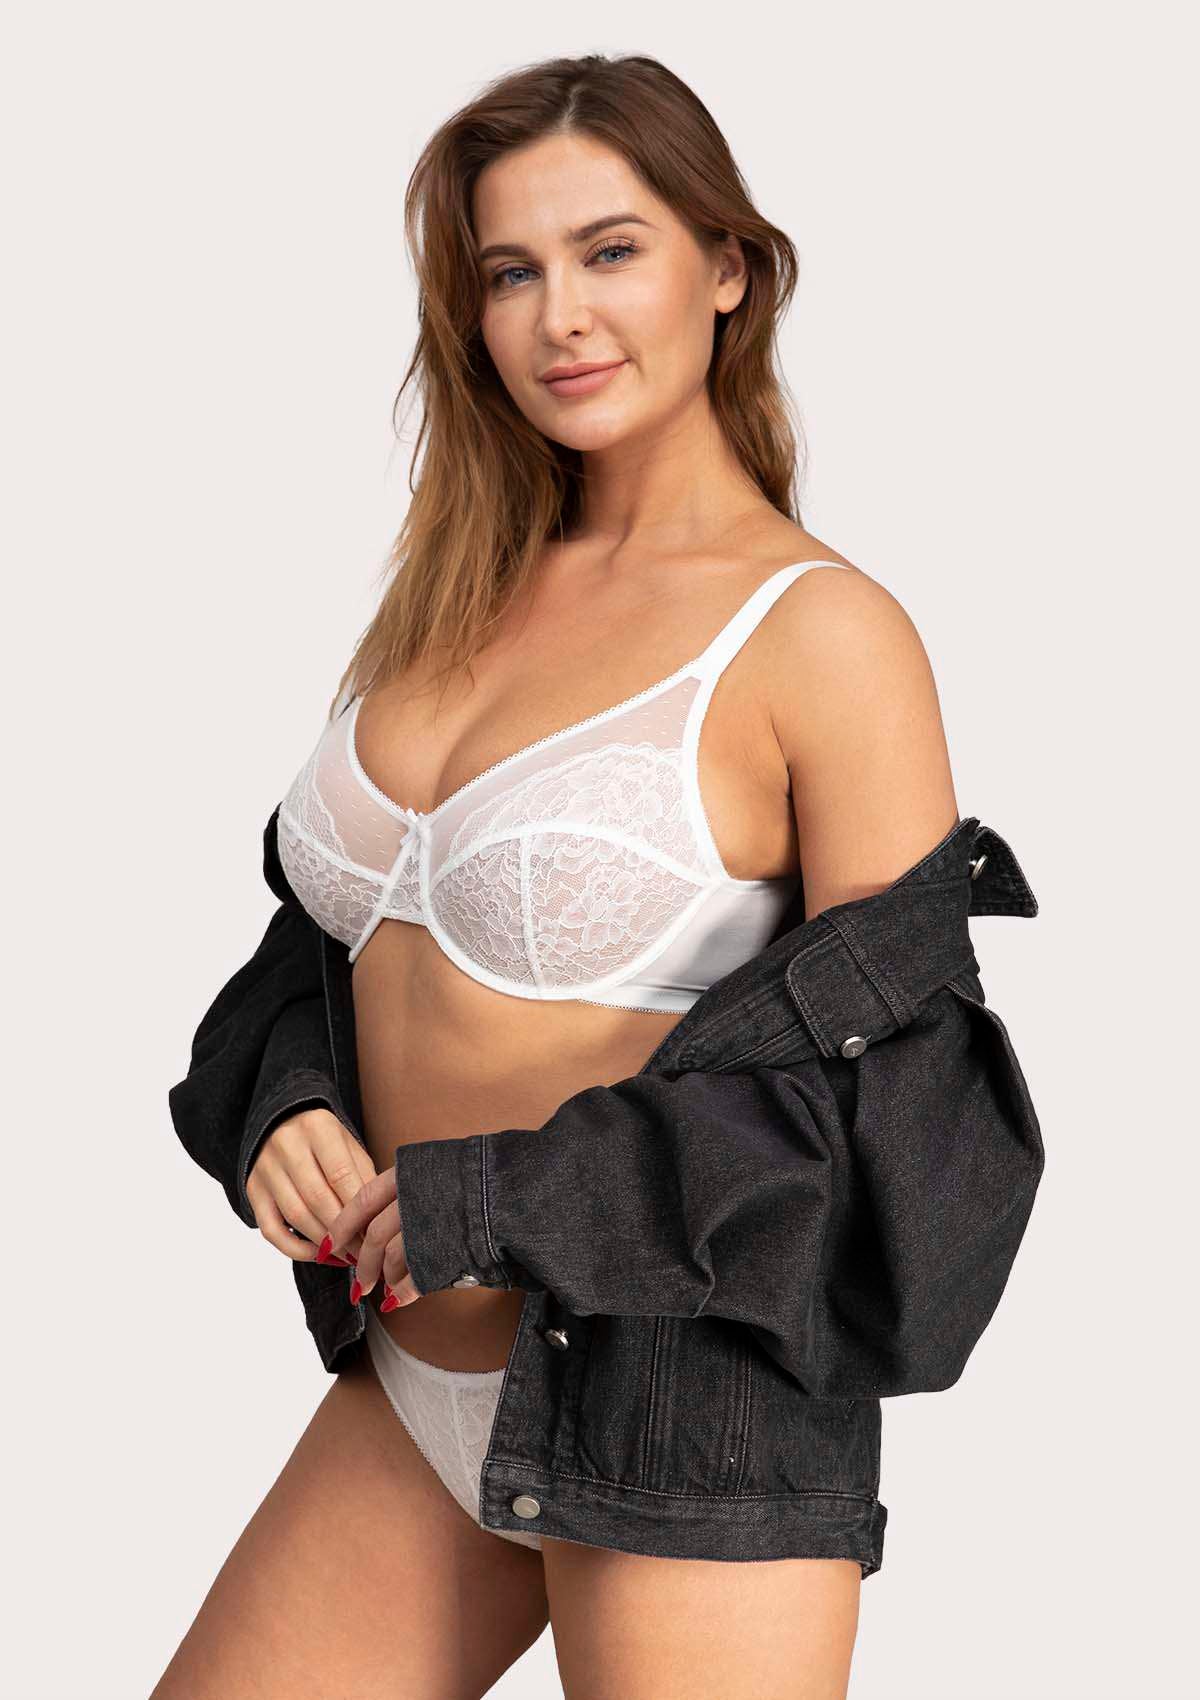 HSIA Enchante Lace Bra And Panties Set: Bra For Side And Back Fat - White / 38 / DDD/F